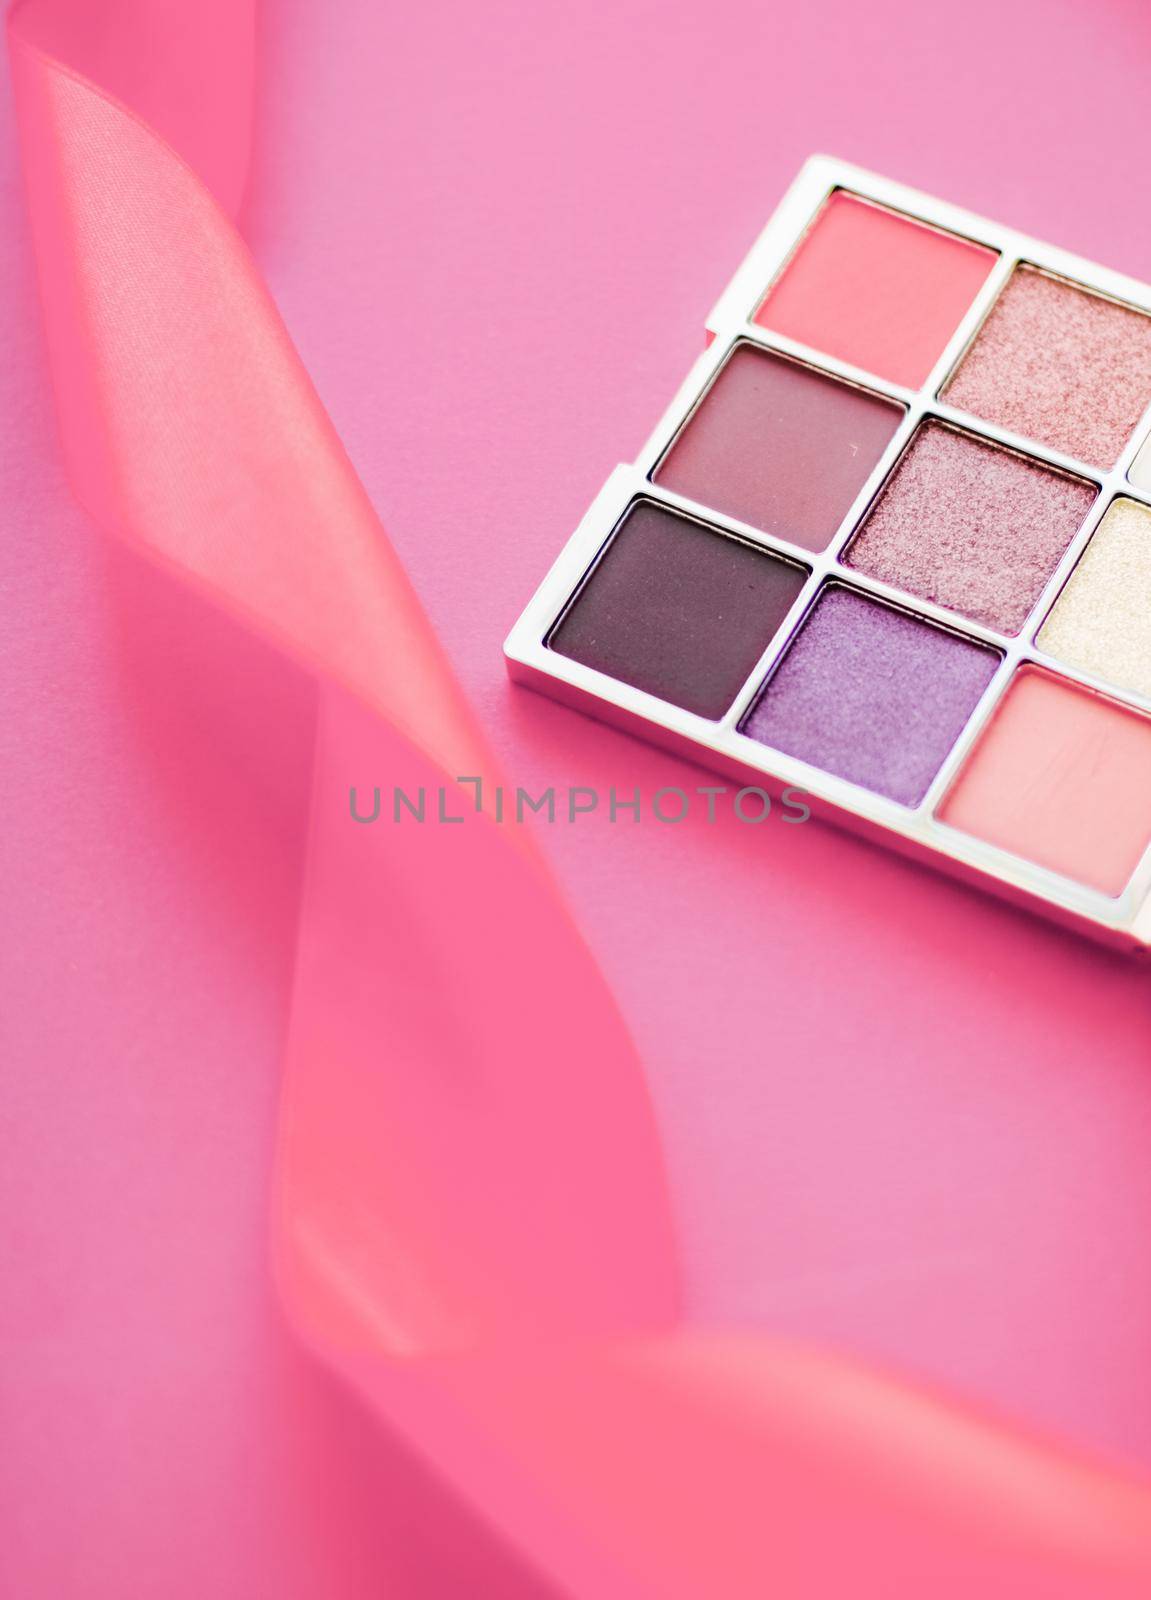 Cosmetic branding, mua and girly concept - Eyeshadow palette and make-up brush on rose background, eye shadows cosmetics product for luxury beauty brand promotion and holiday fashion blog design